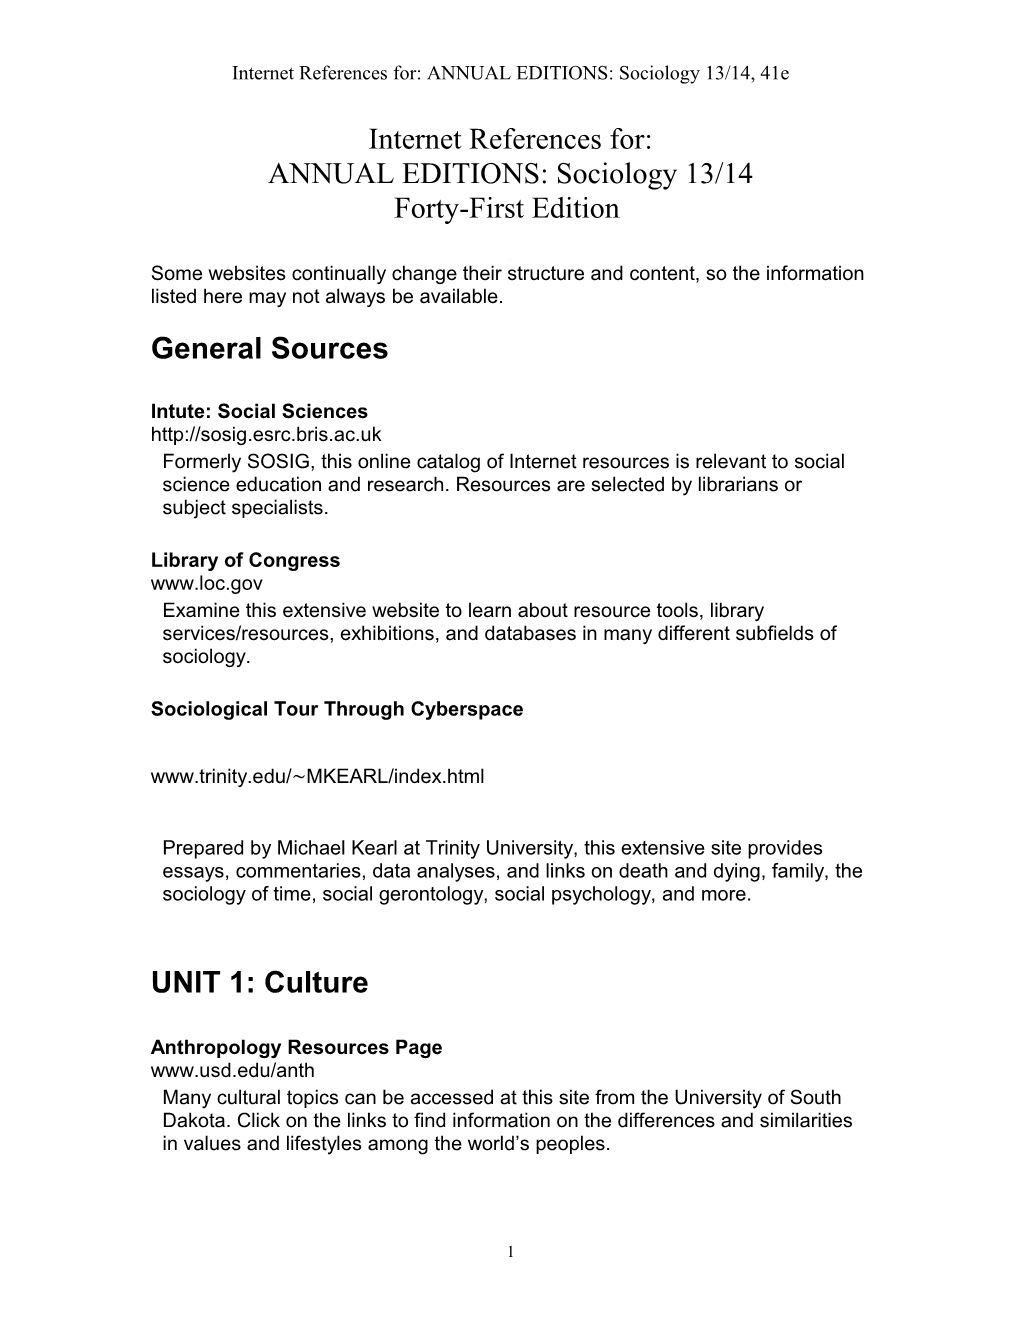 Internet References For:ANNUAL EDITIONS: Sociology 13/14, 41E